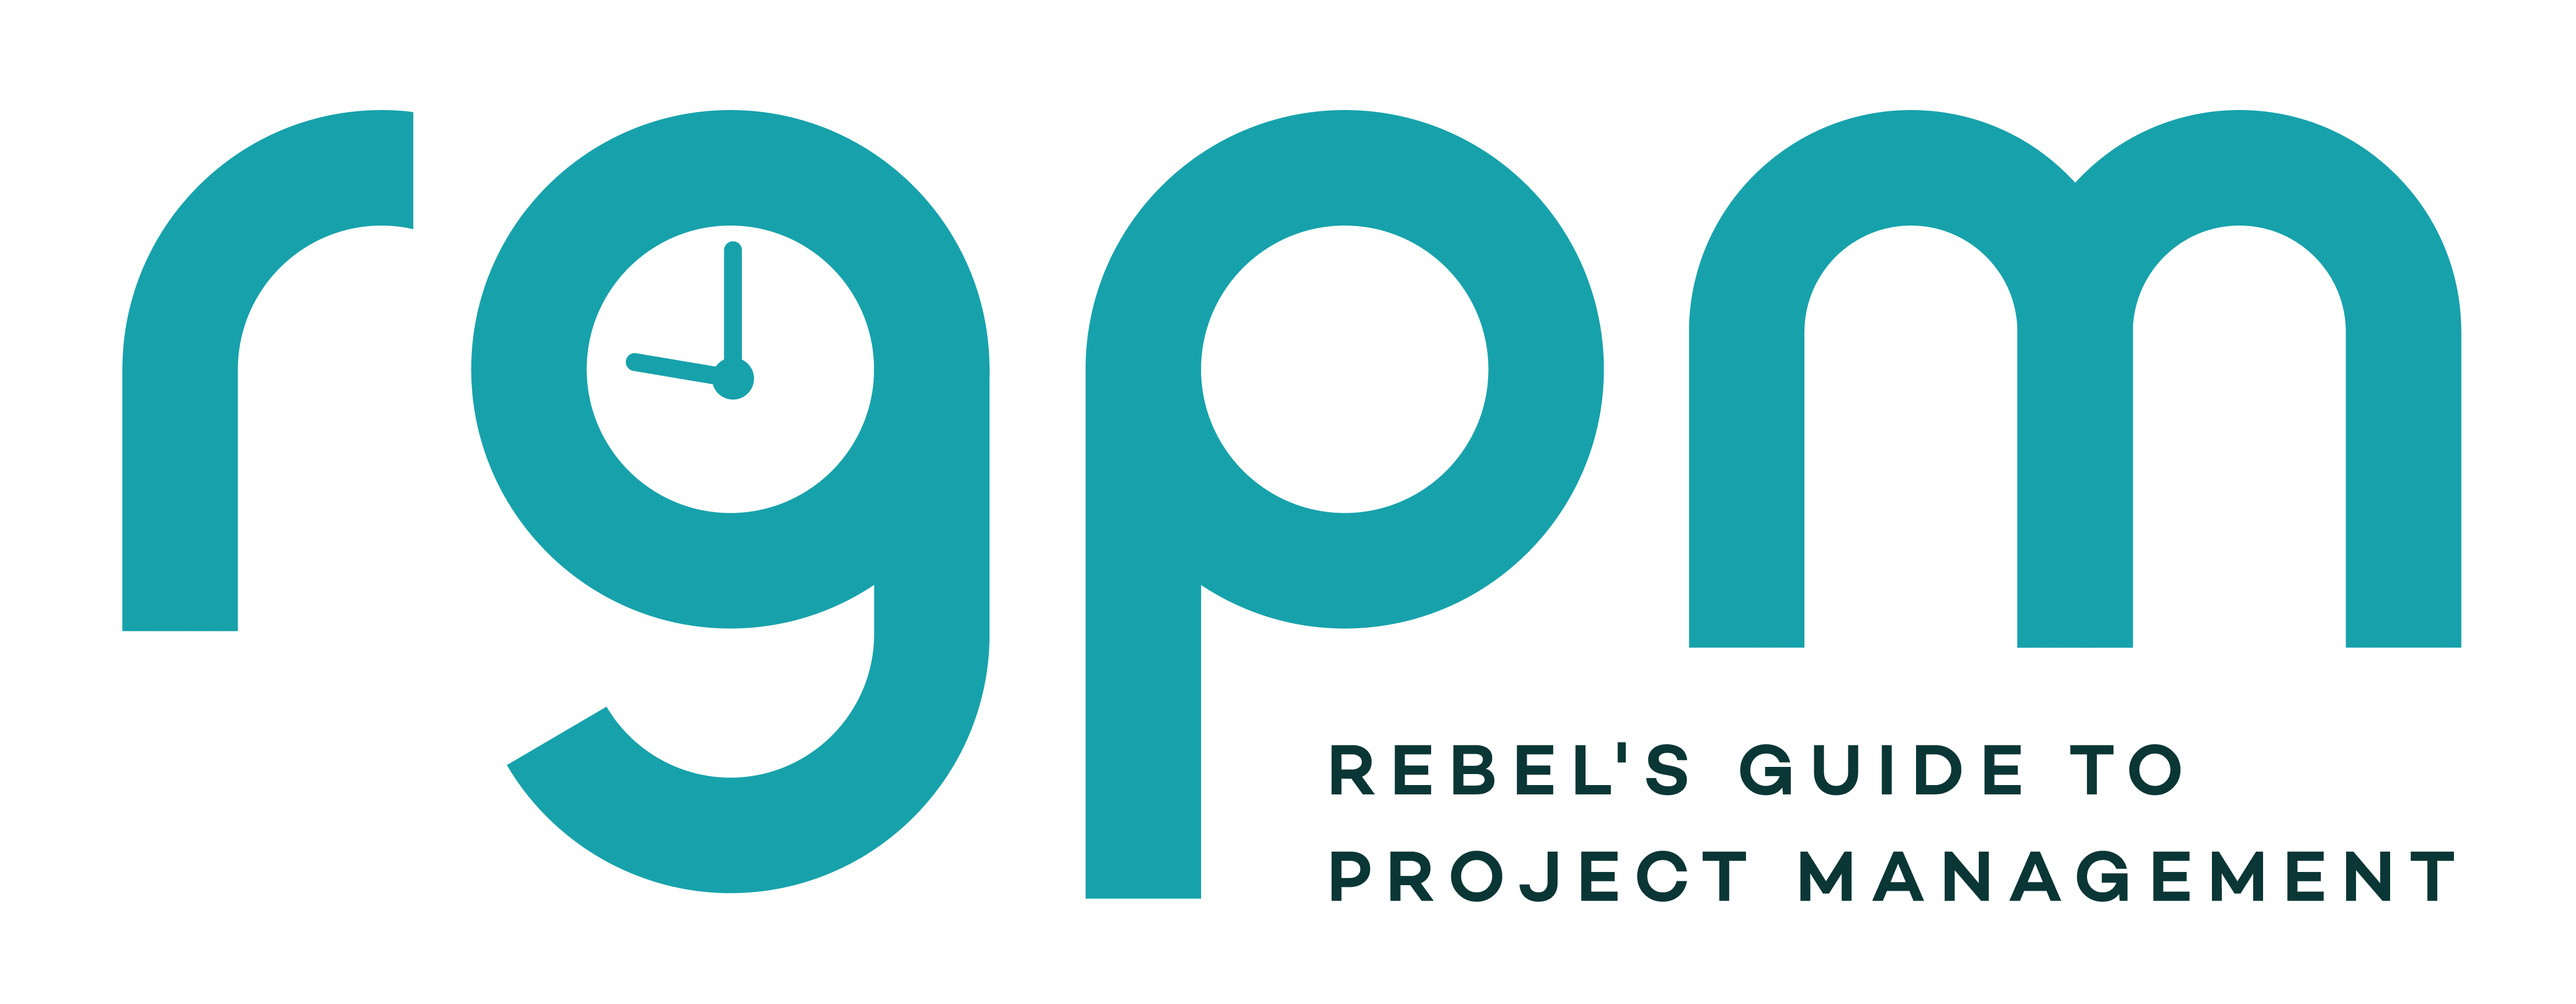 Rebel's Guide to Project Management